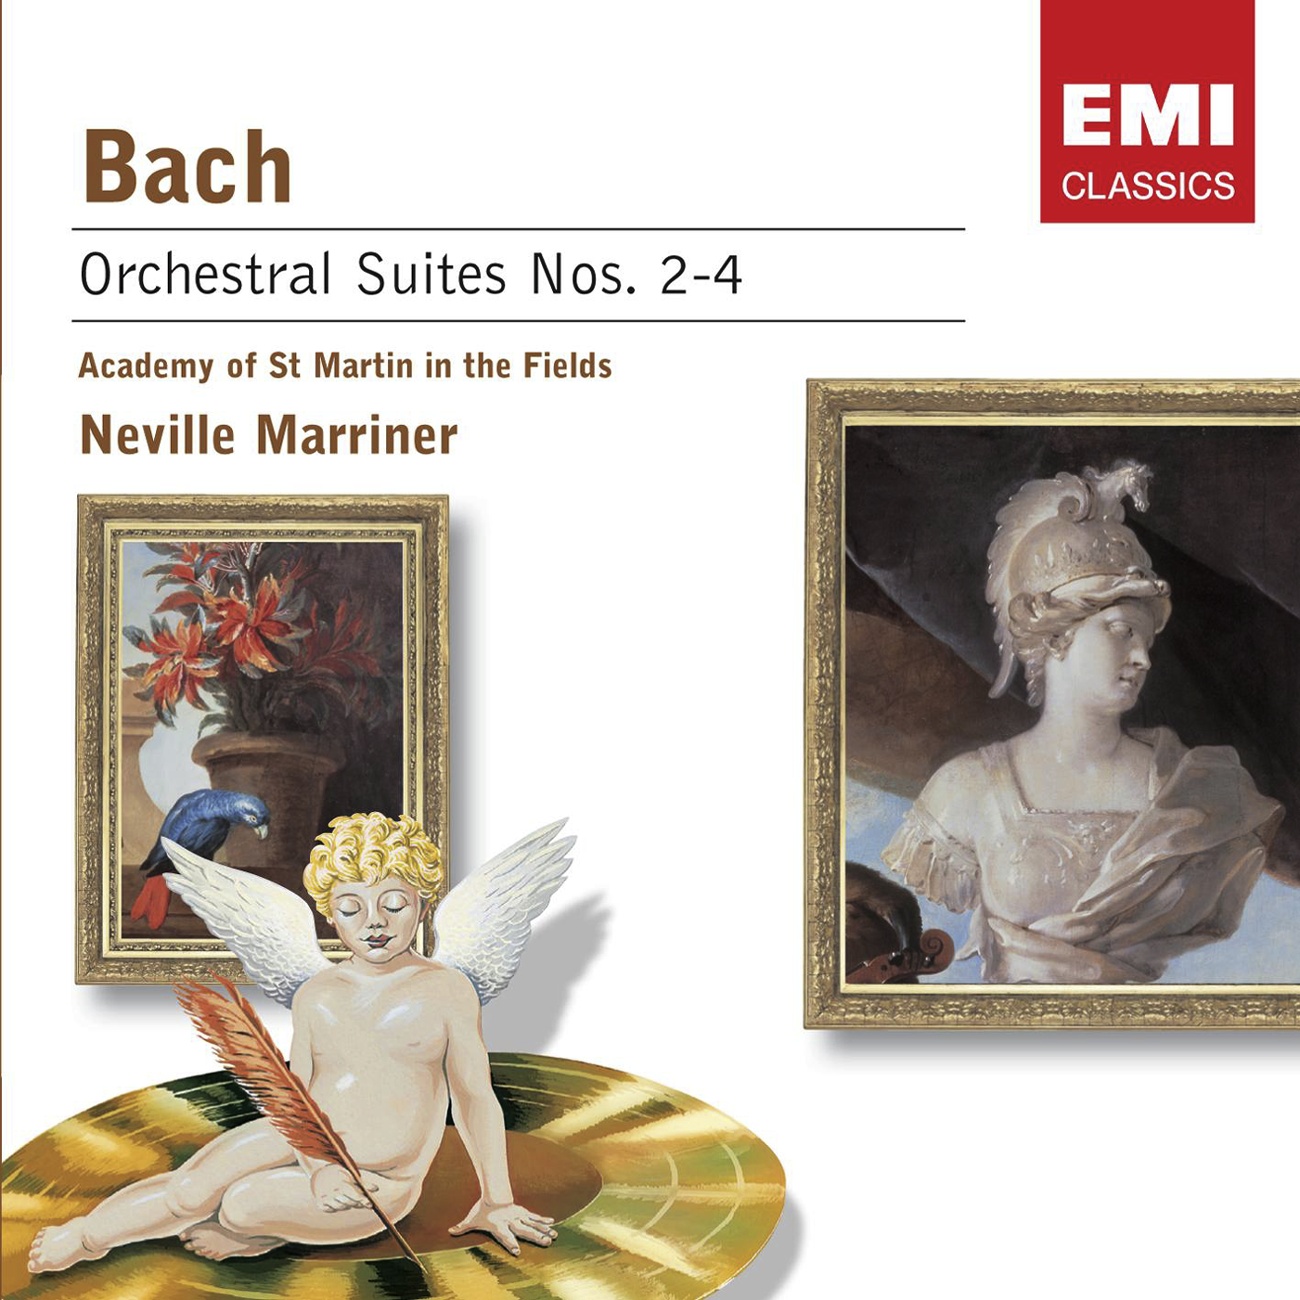 4 Orchestral Suites, BWV 1066-9, Suite No.3 in D Major, BWV 1068 (2 oboes, 3 trumpets, strings and timpani): Gavottes I & II